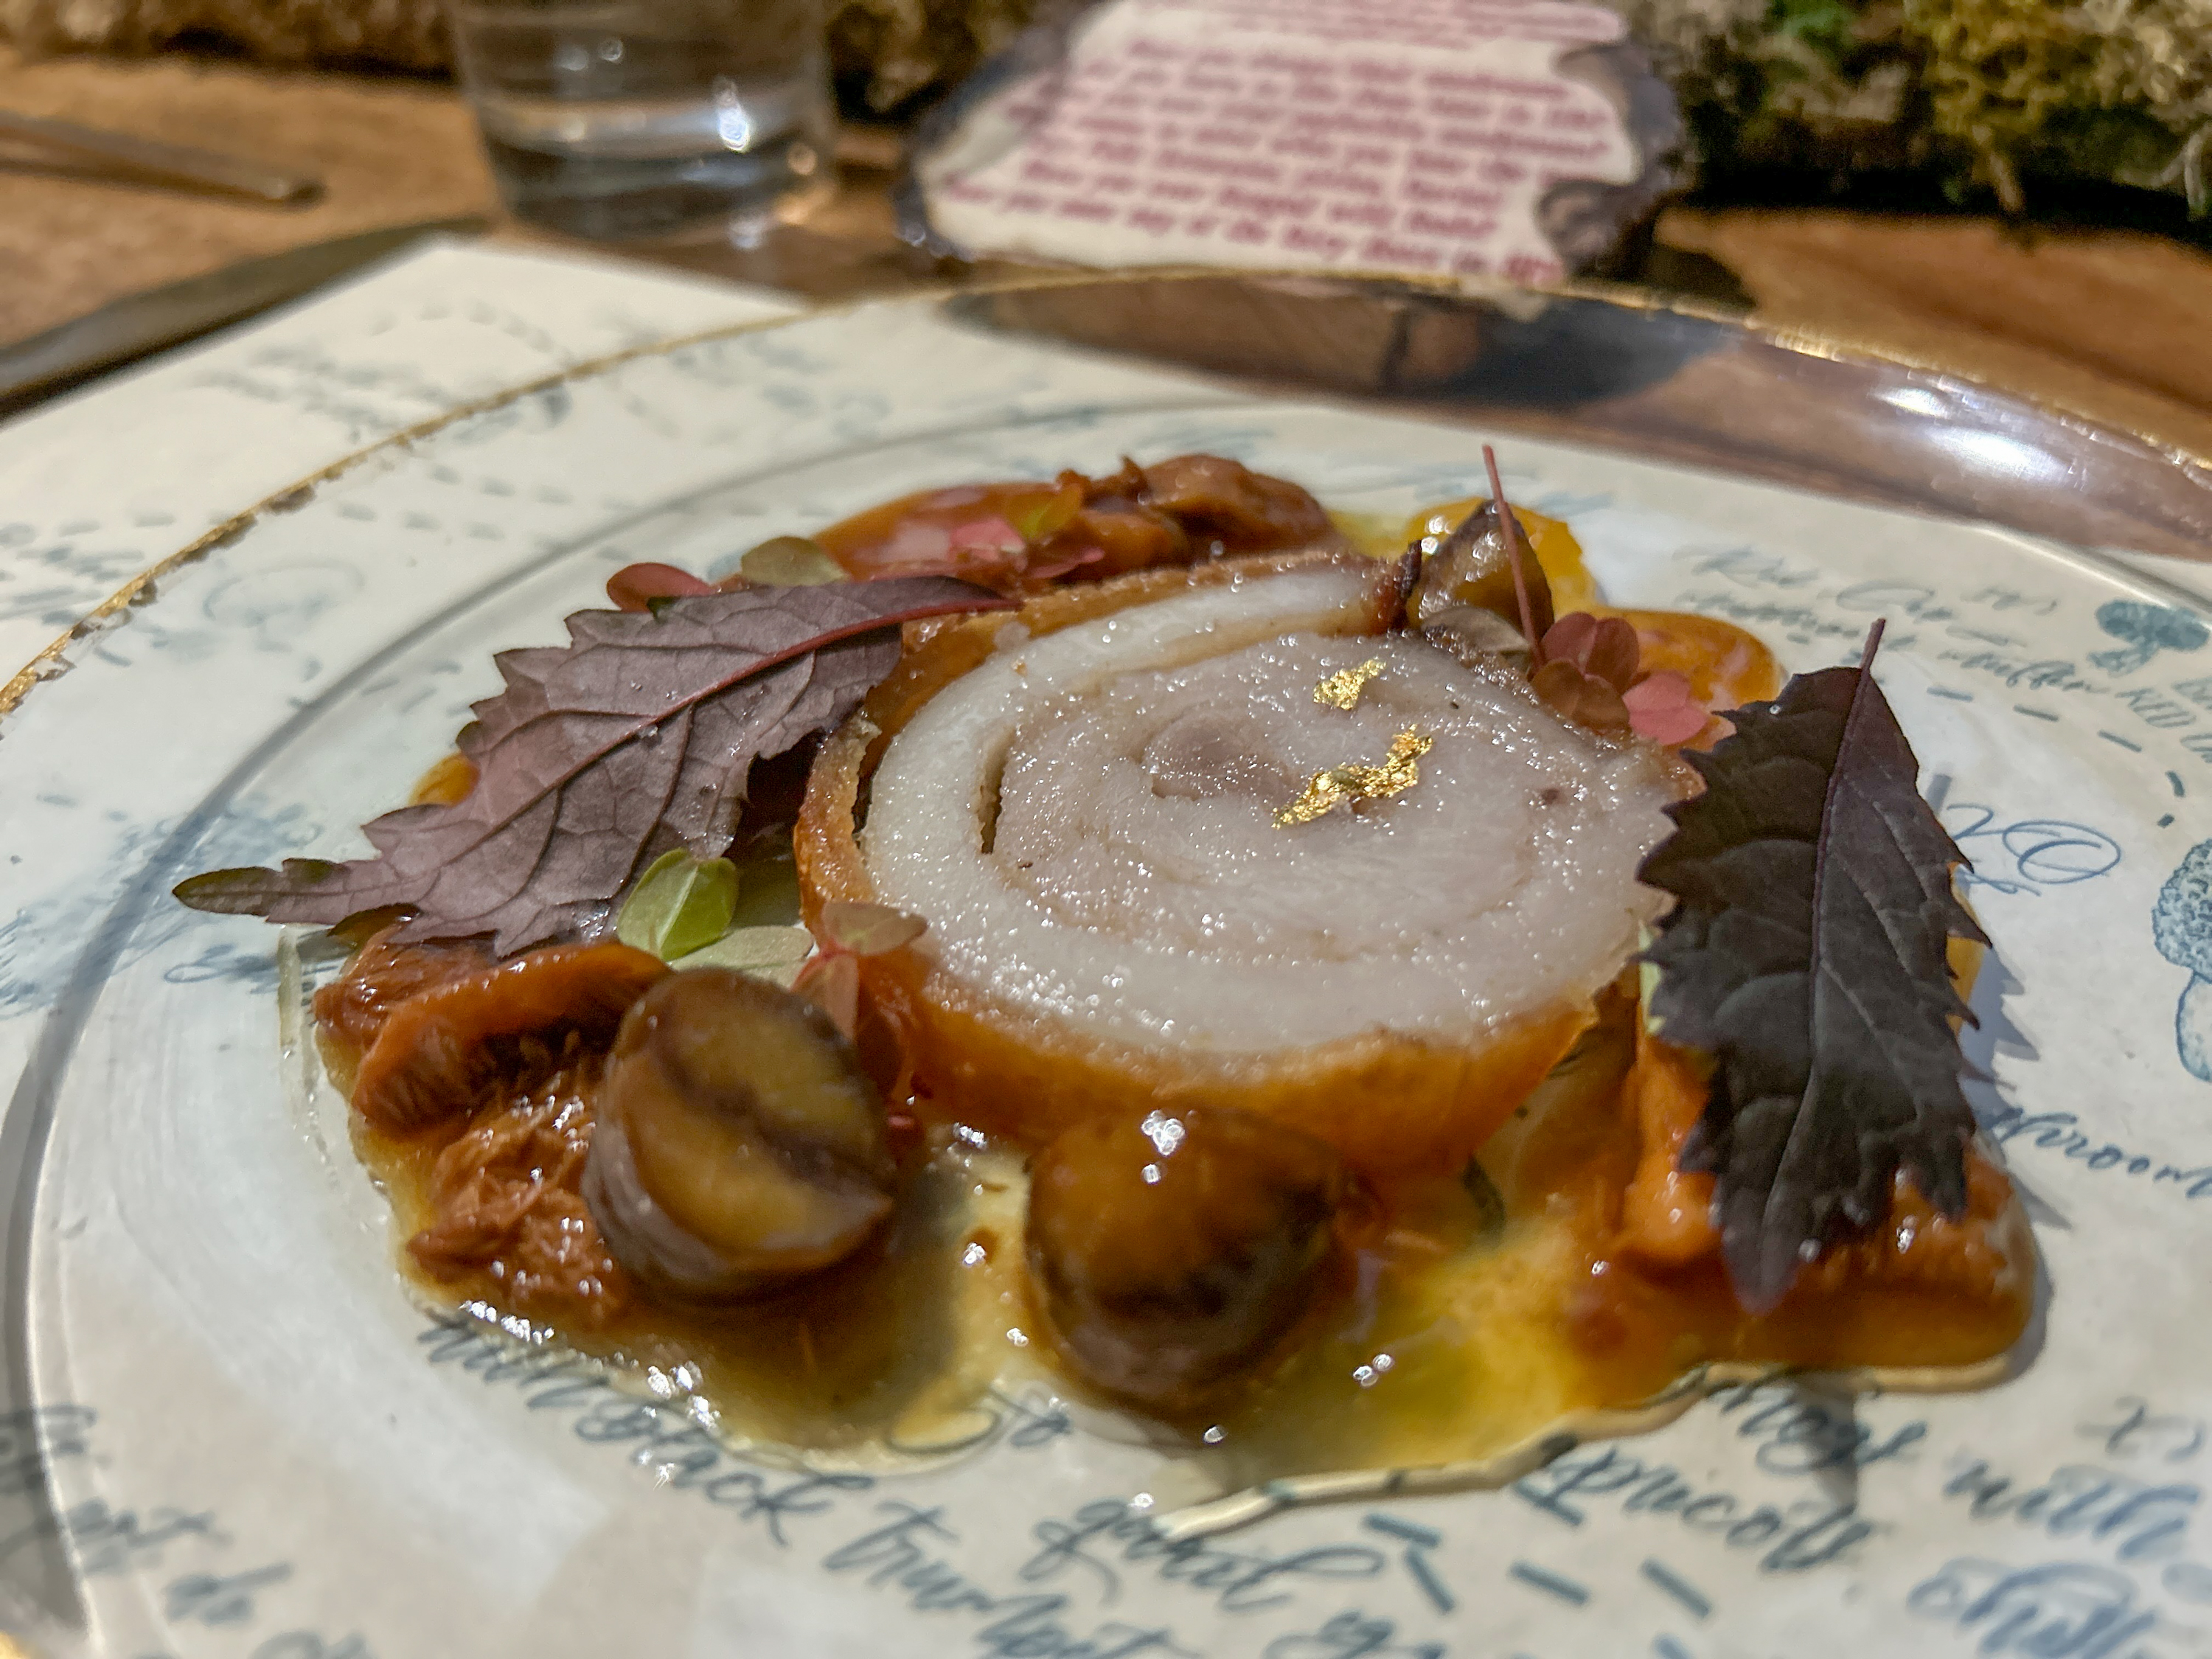 A gourmet dish with onion slices, mushrooms, and leaves on a decorative plate.